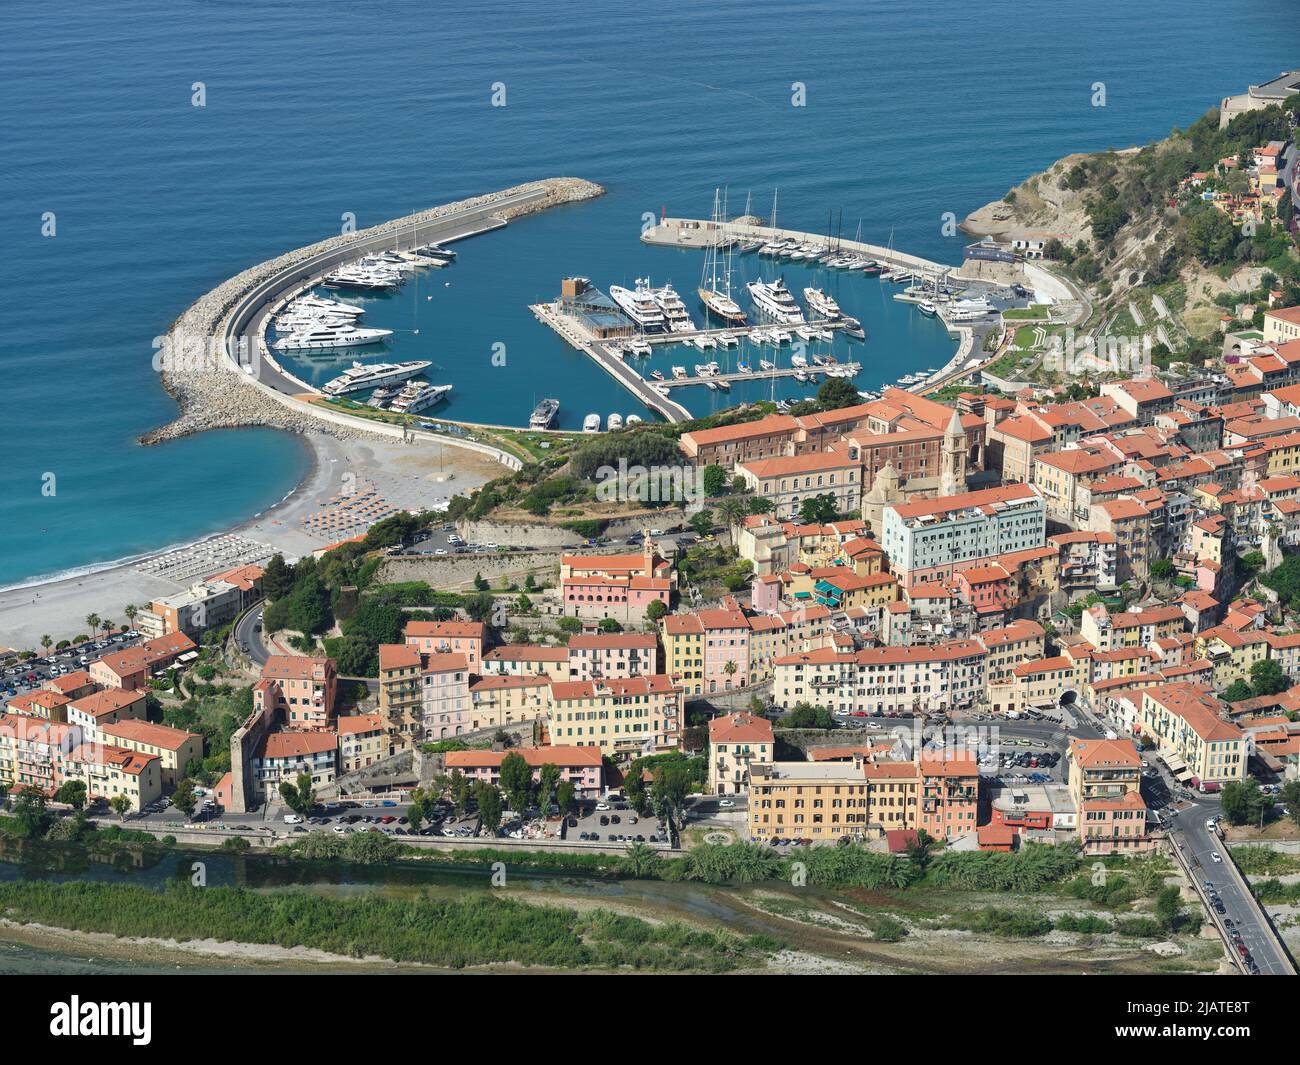 AERIAL VIEW. The medieval town of Alta Ventimiglia and the new (inaugurated in 2021) marina with its superyachts. Ventimiglia, Liguria, Italy. Stock Photo